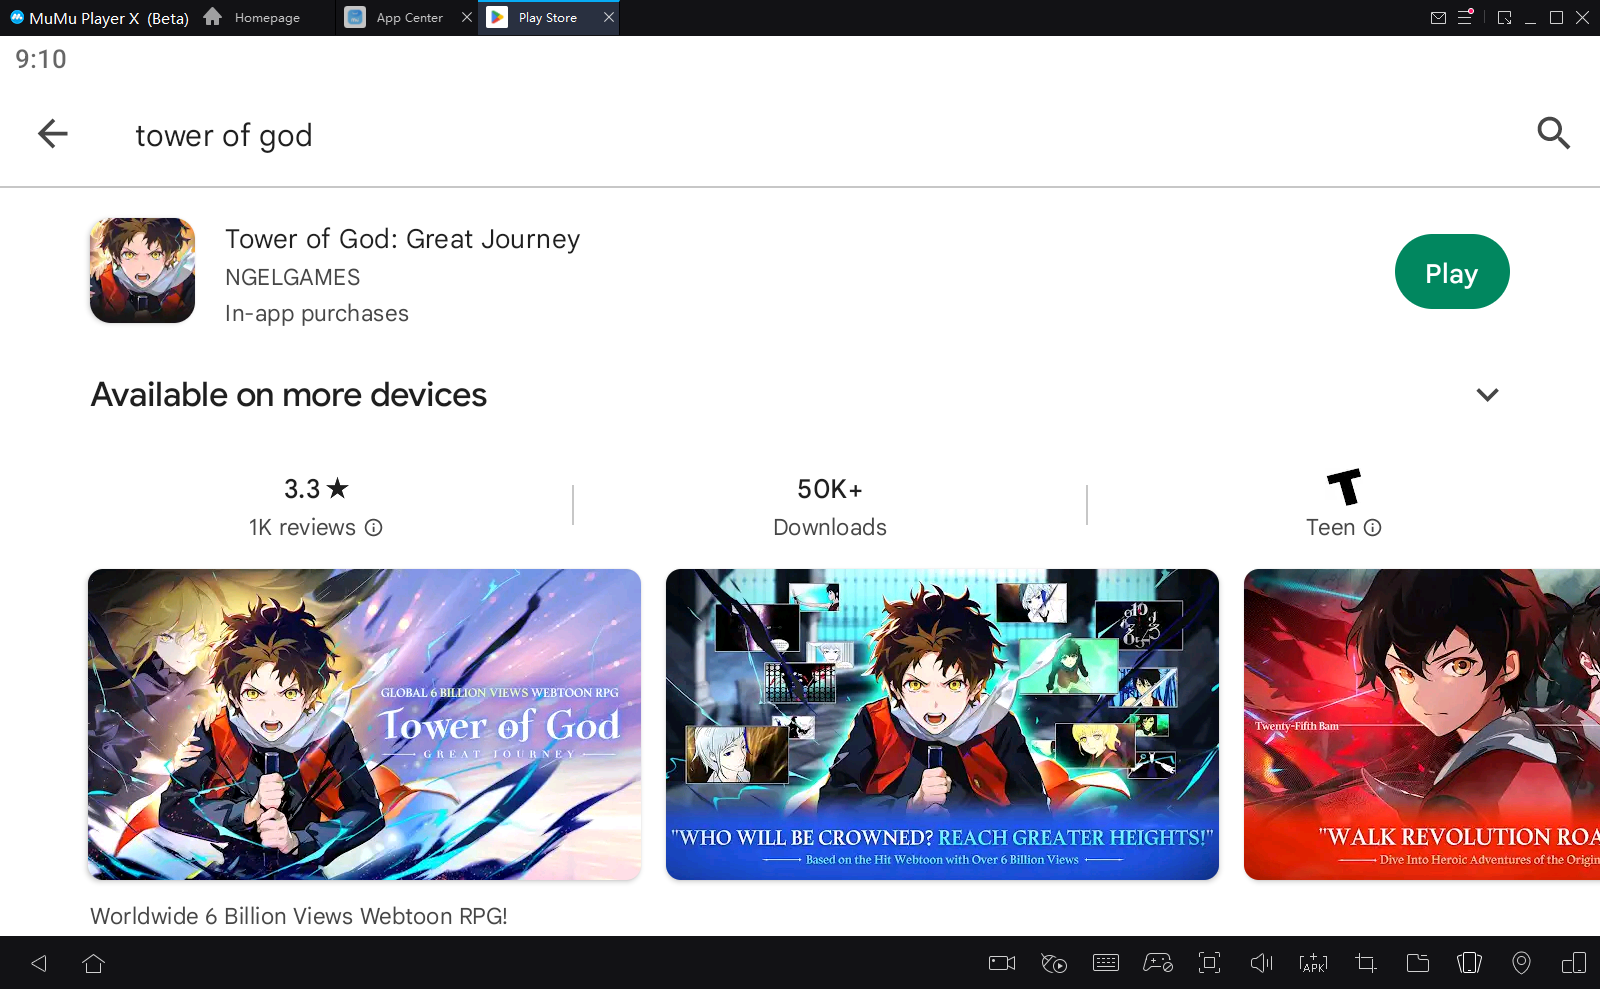 How to Install and Play Tower of God: The Great Journey on PC with